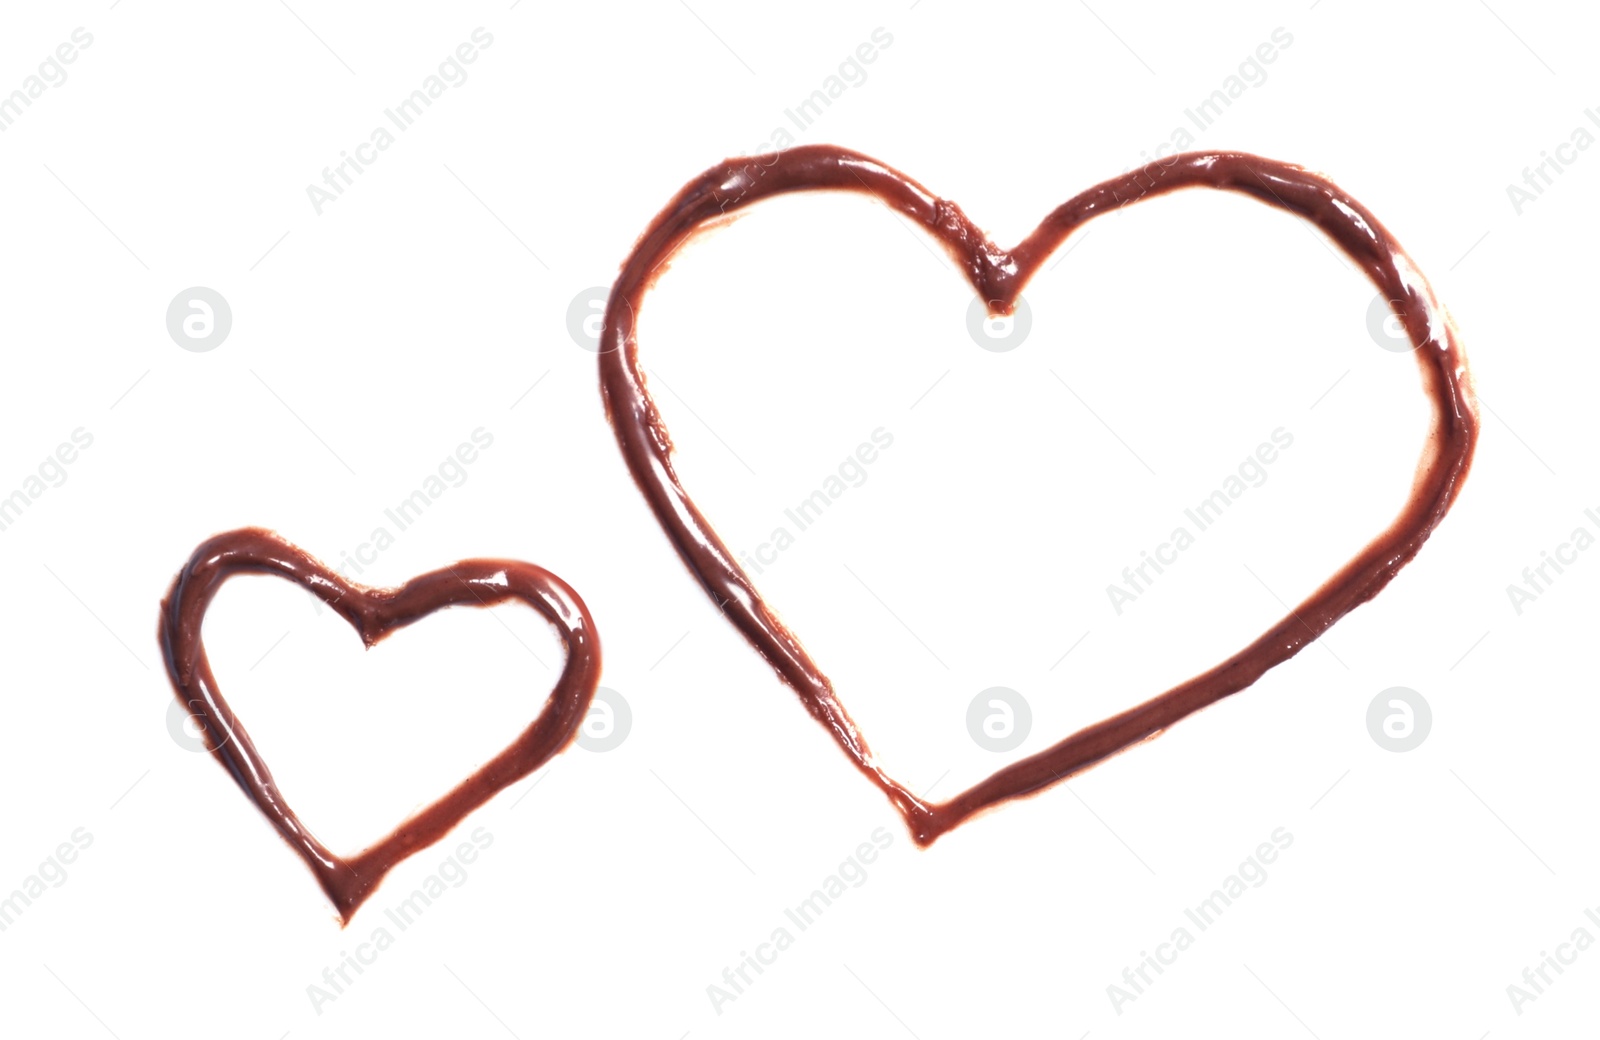 Photo of Hearts made of milk chocolate on white background, top view